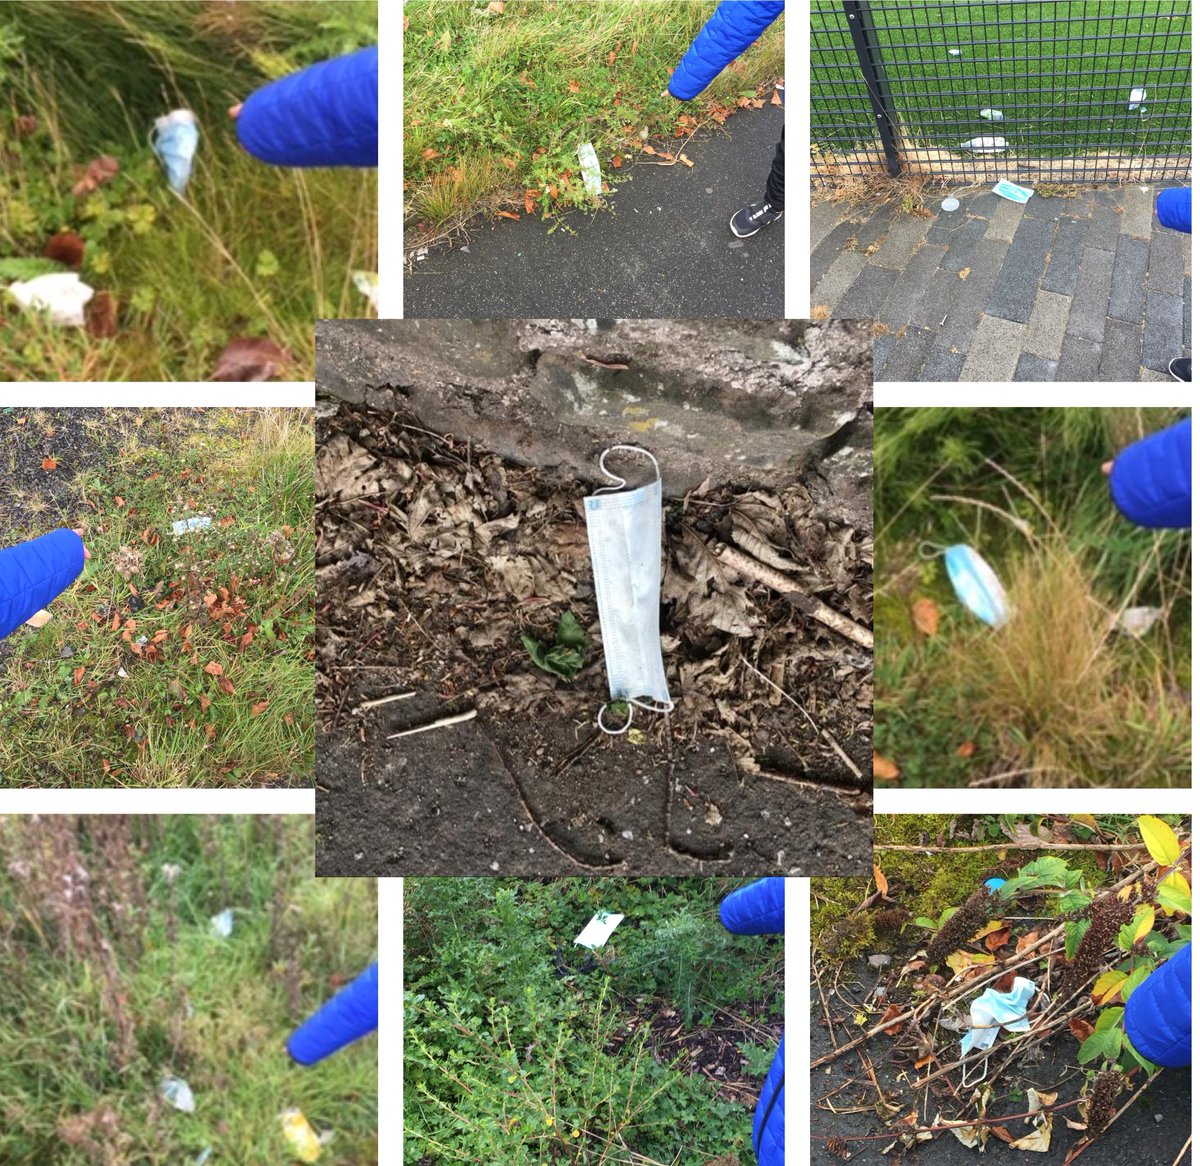 How many are you finding on your #winter walks? #TeamKSBScot found 21 last week!
Complete a #littersurvey and tell us what you're finding so that we can create a snapshot of #litter across #Scotland👉 ow.ly/eu0z50CiuU1